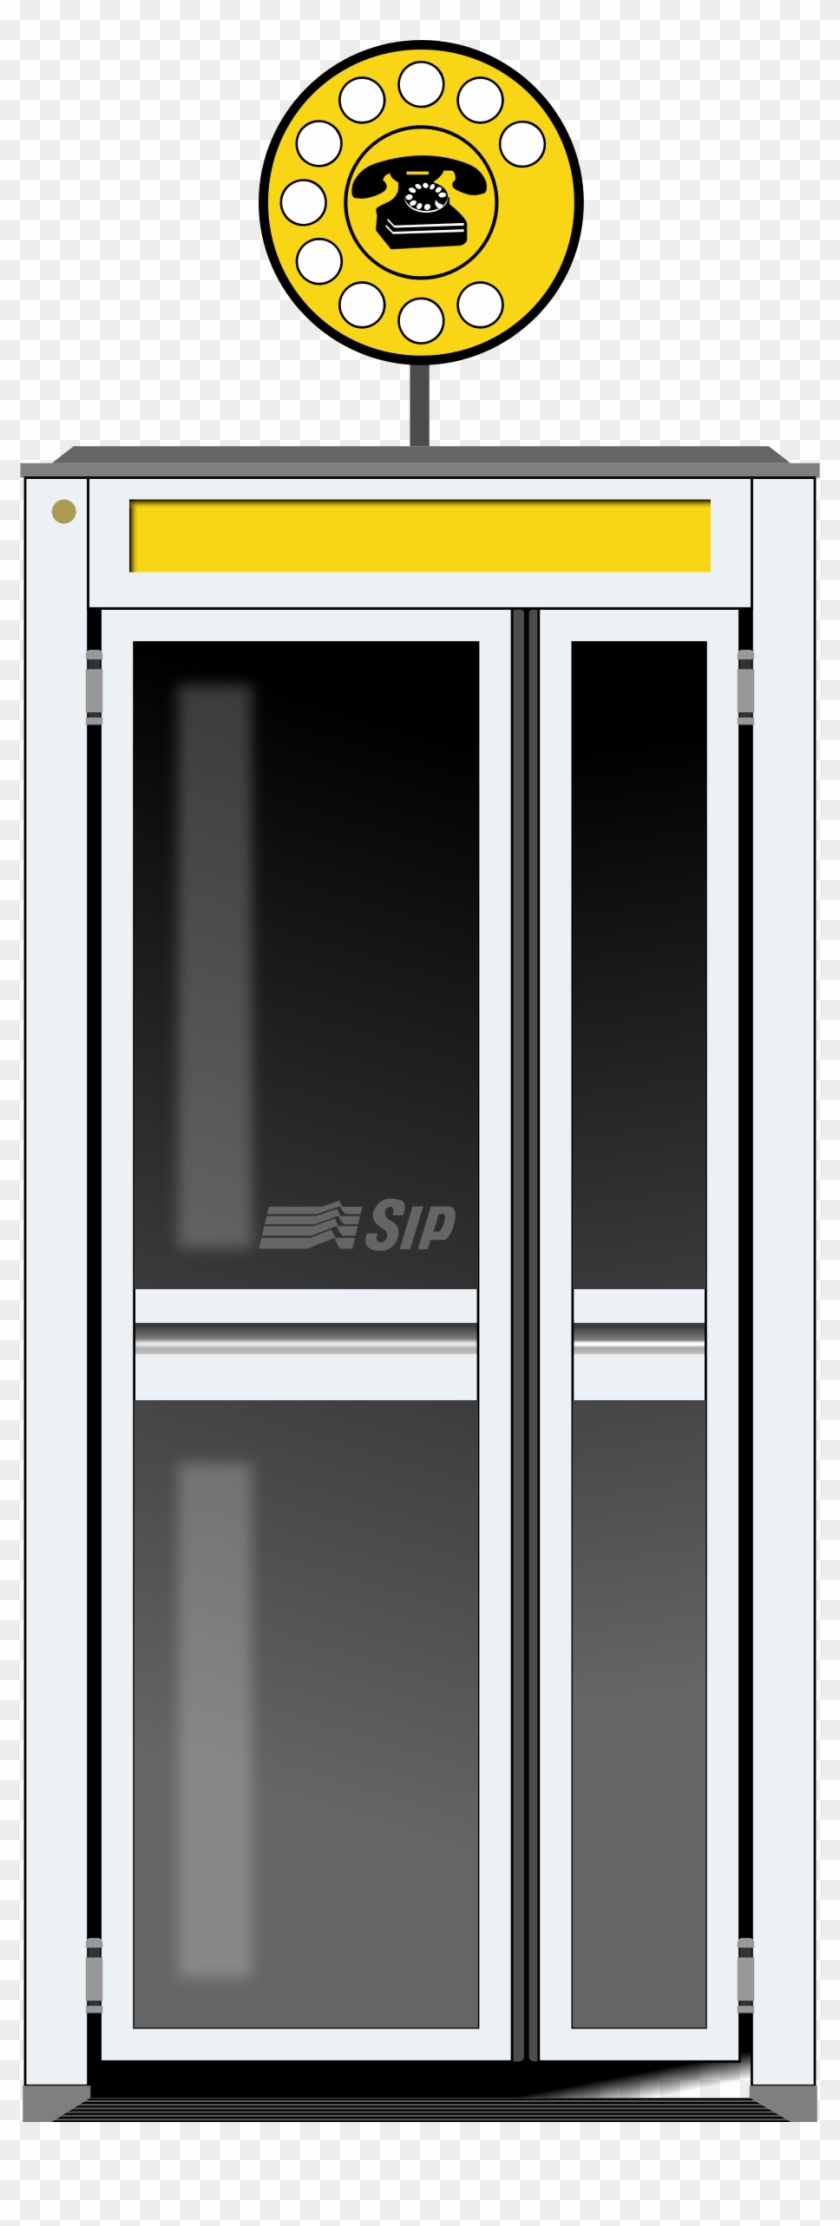 This Free Icons Png Design Of Telephone Booth - Cabina Telefonica Png Clipart #2288352